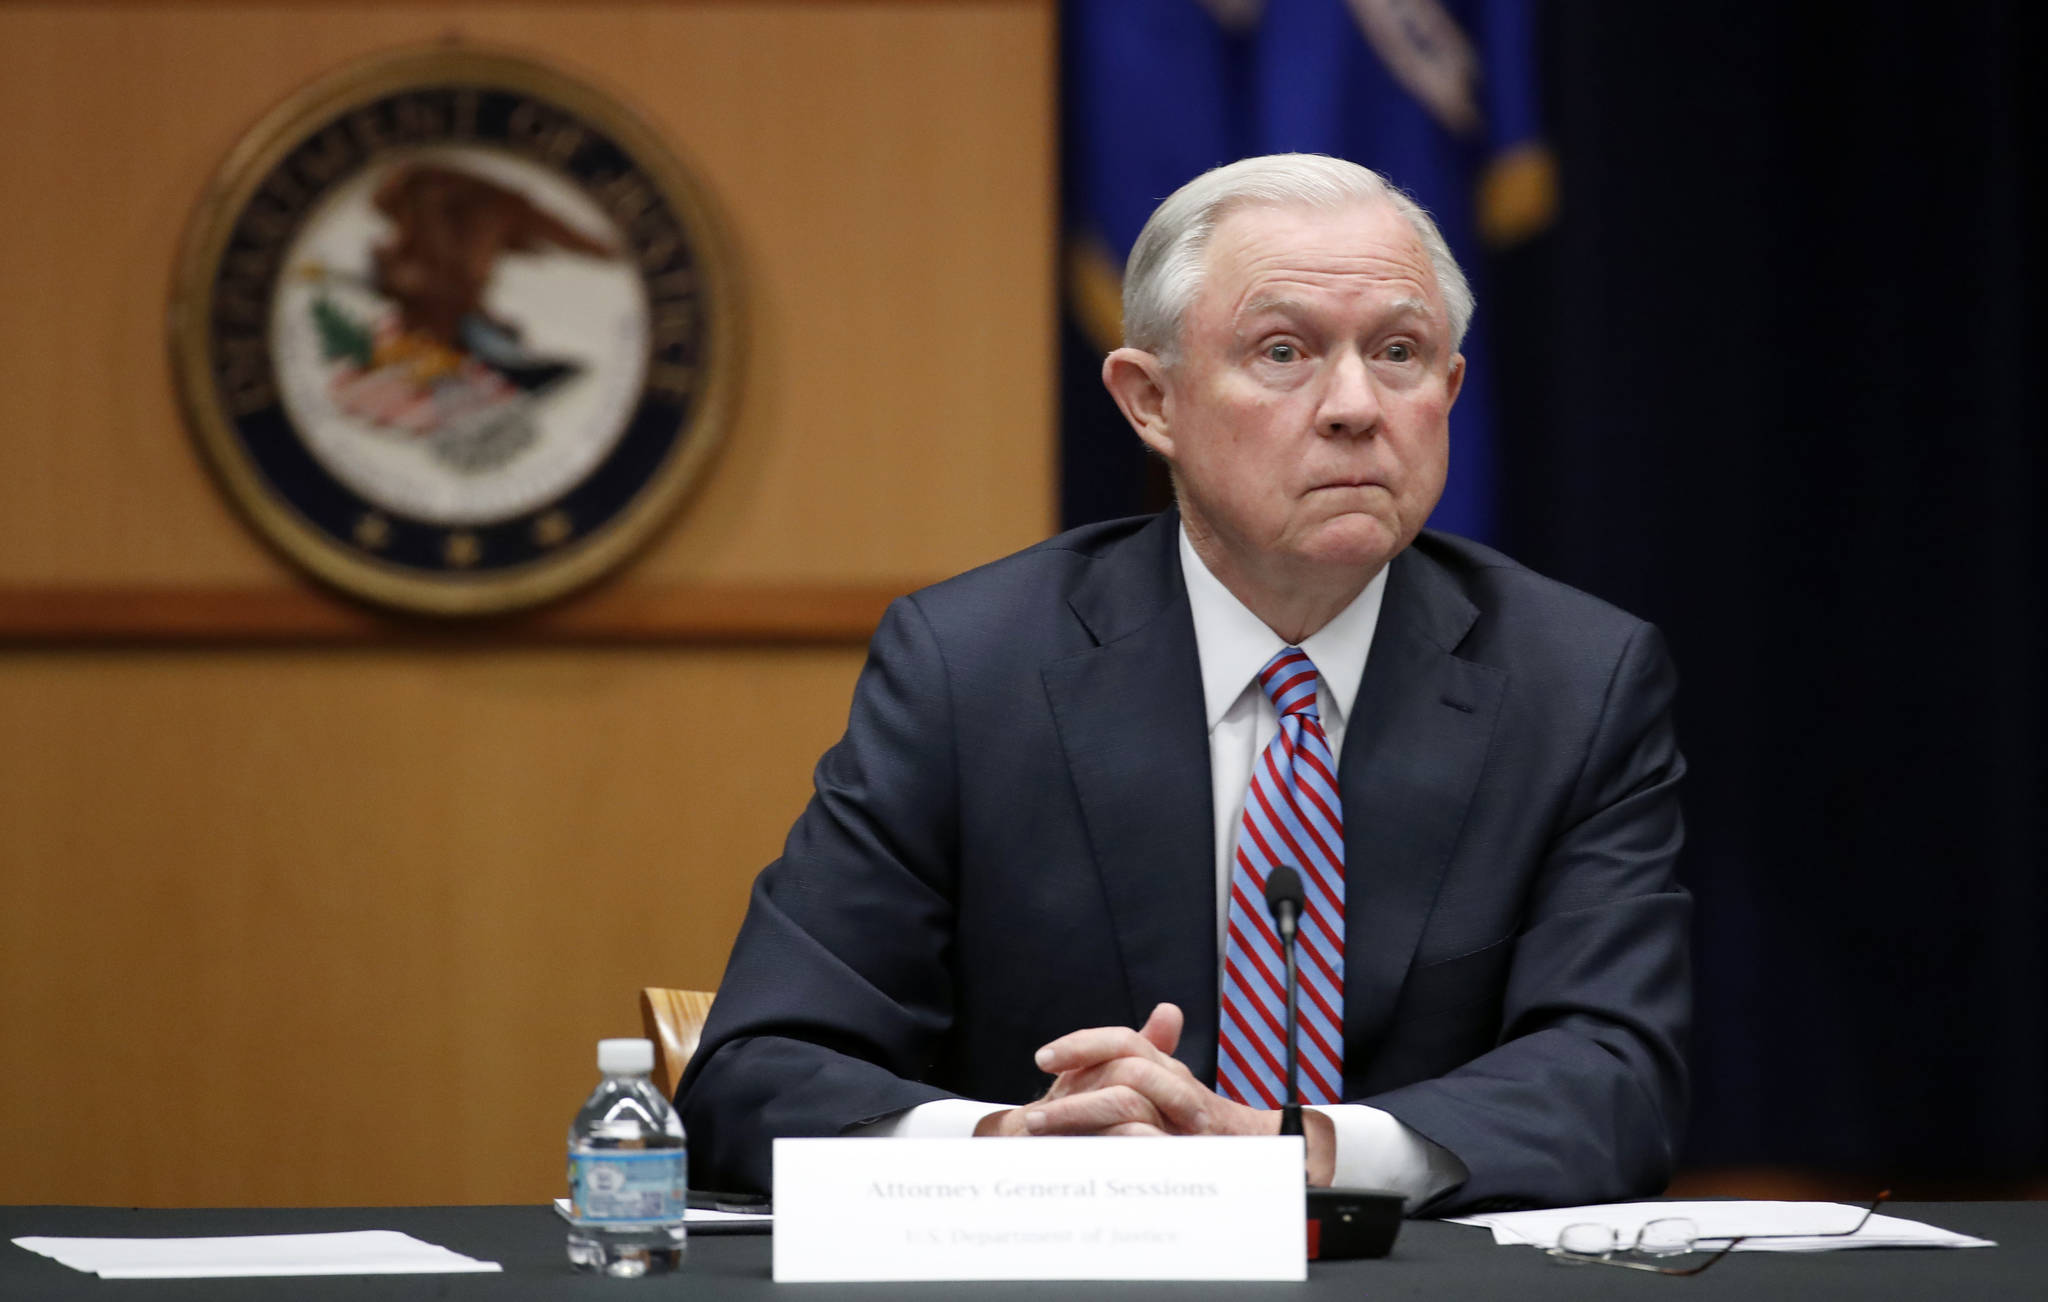 Attorney General Jeff Sessions at the Justice Department in Washington. (AP Photo/Alex Brandon)